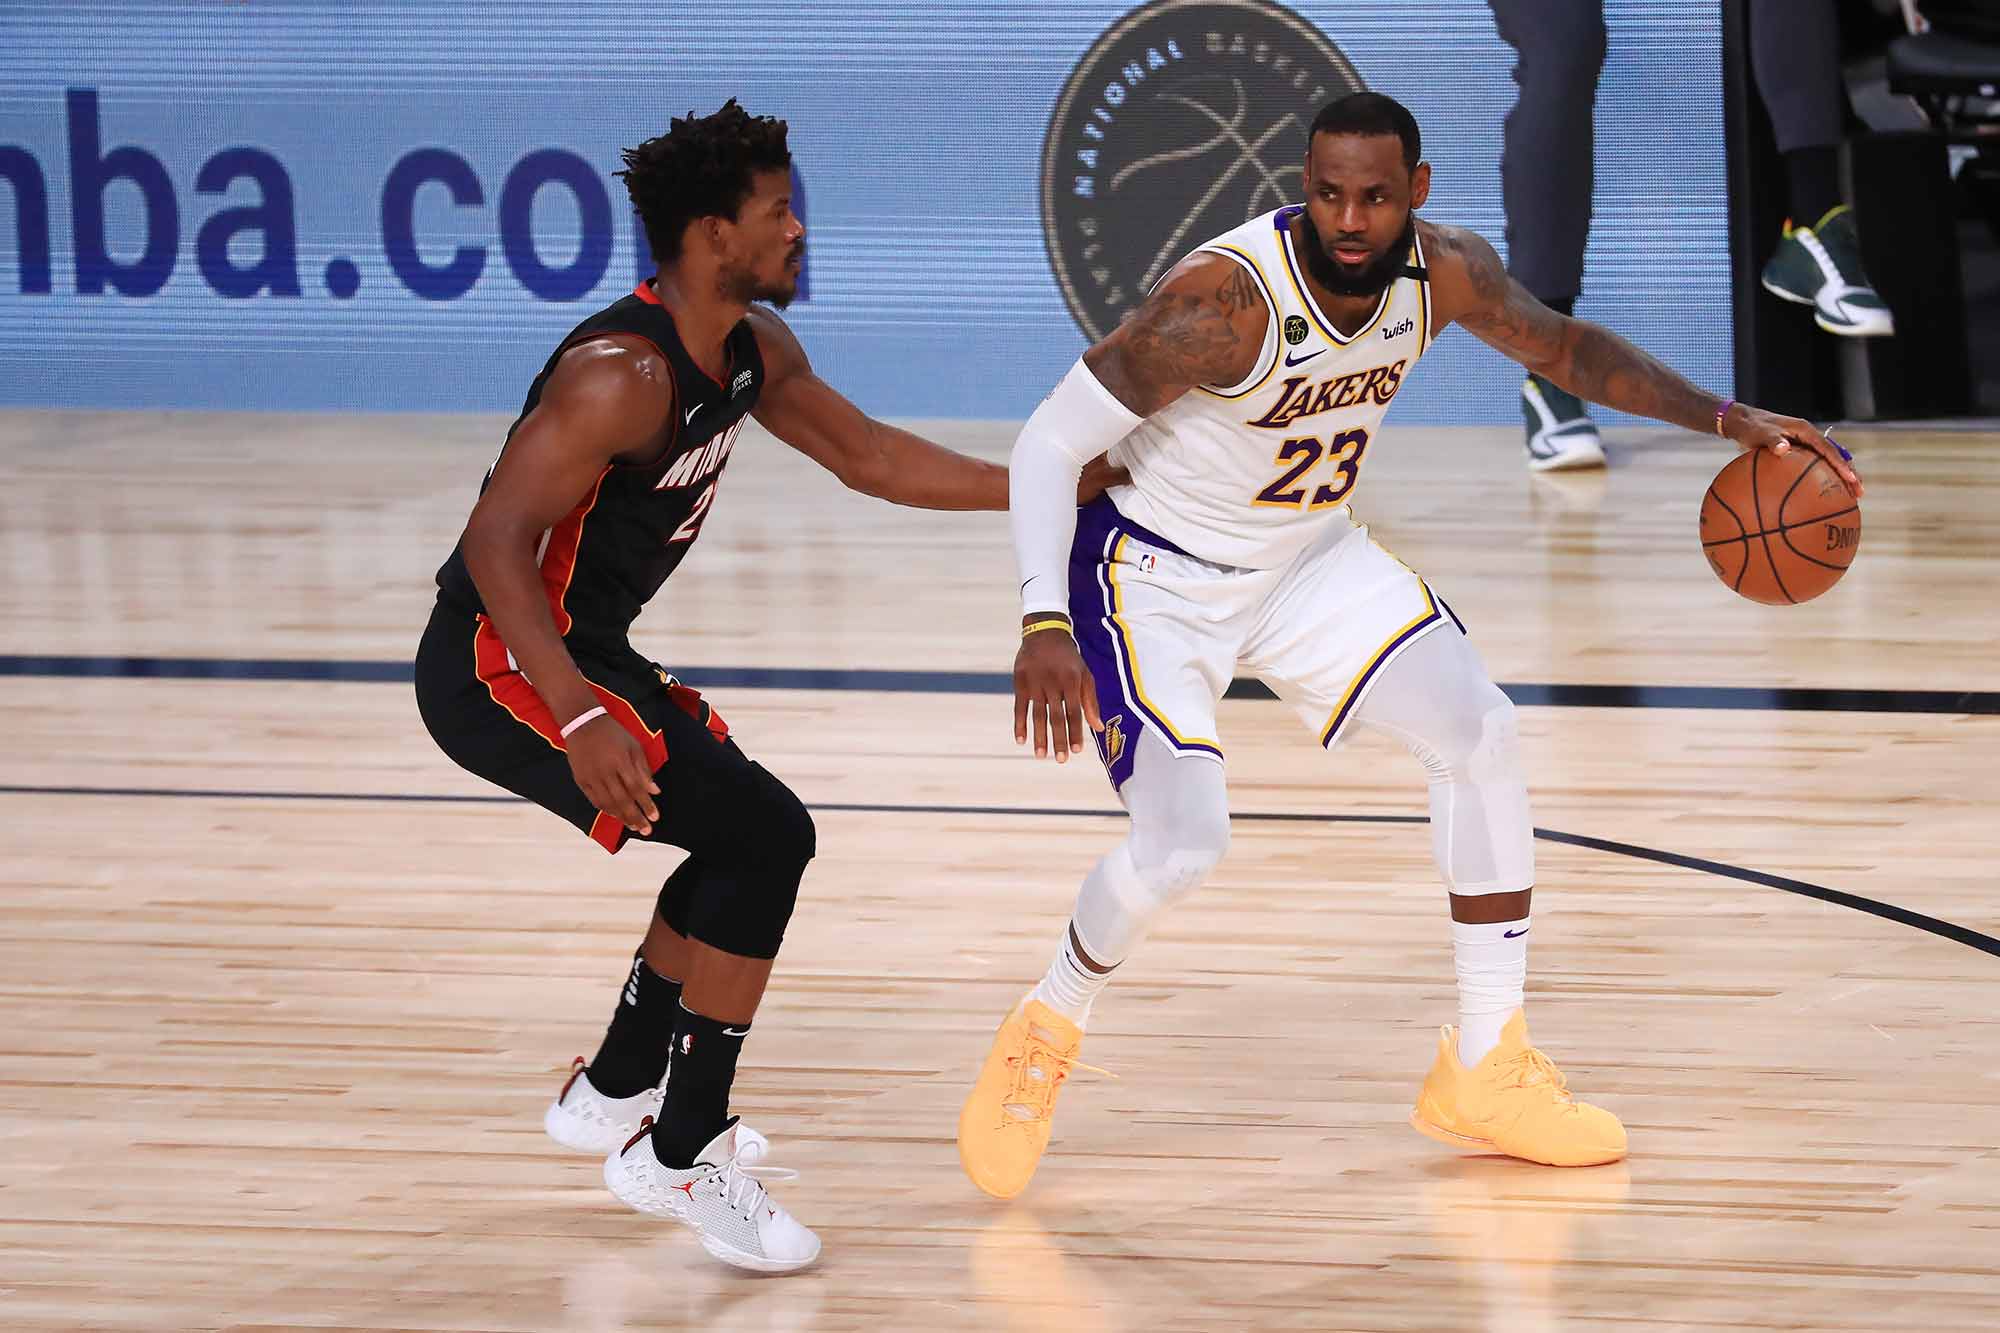 44 HQ Pictures Nba Games Tv Schedule Canada - What Channel Is The Nba On In Canada Your 2020 21 Nba Broadcast Schedule Nba Com Canada The Official Site Of The Nba